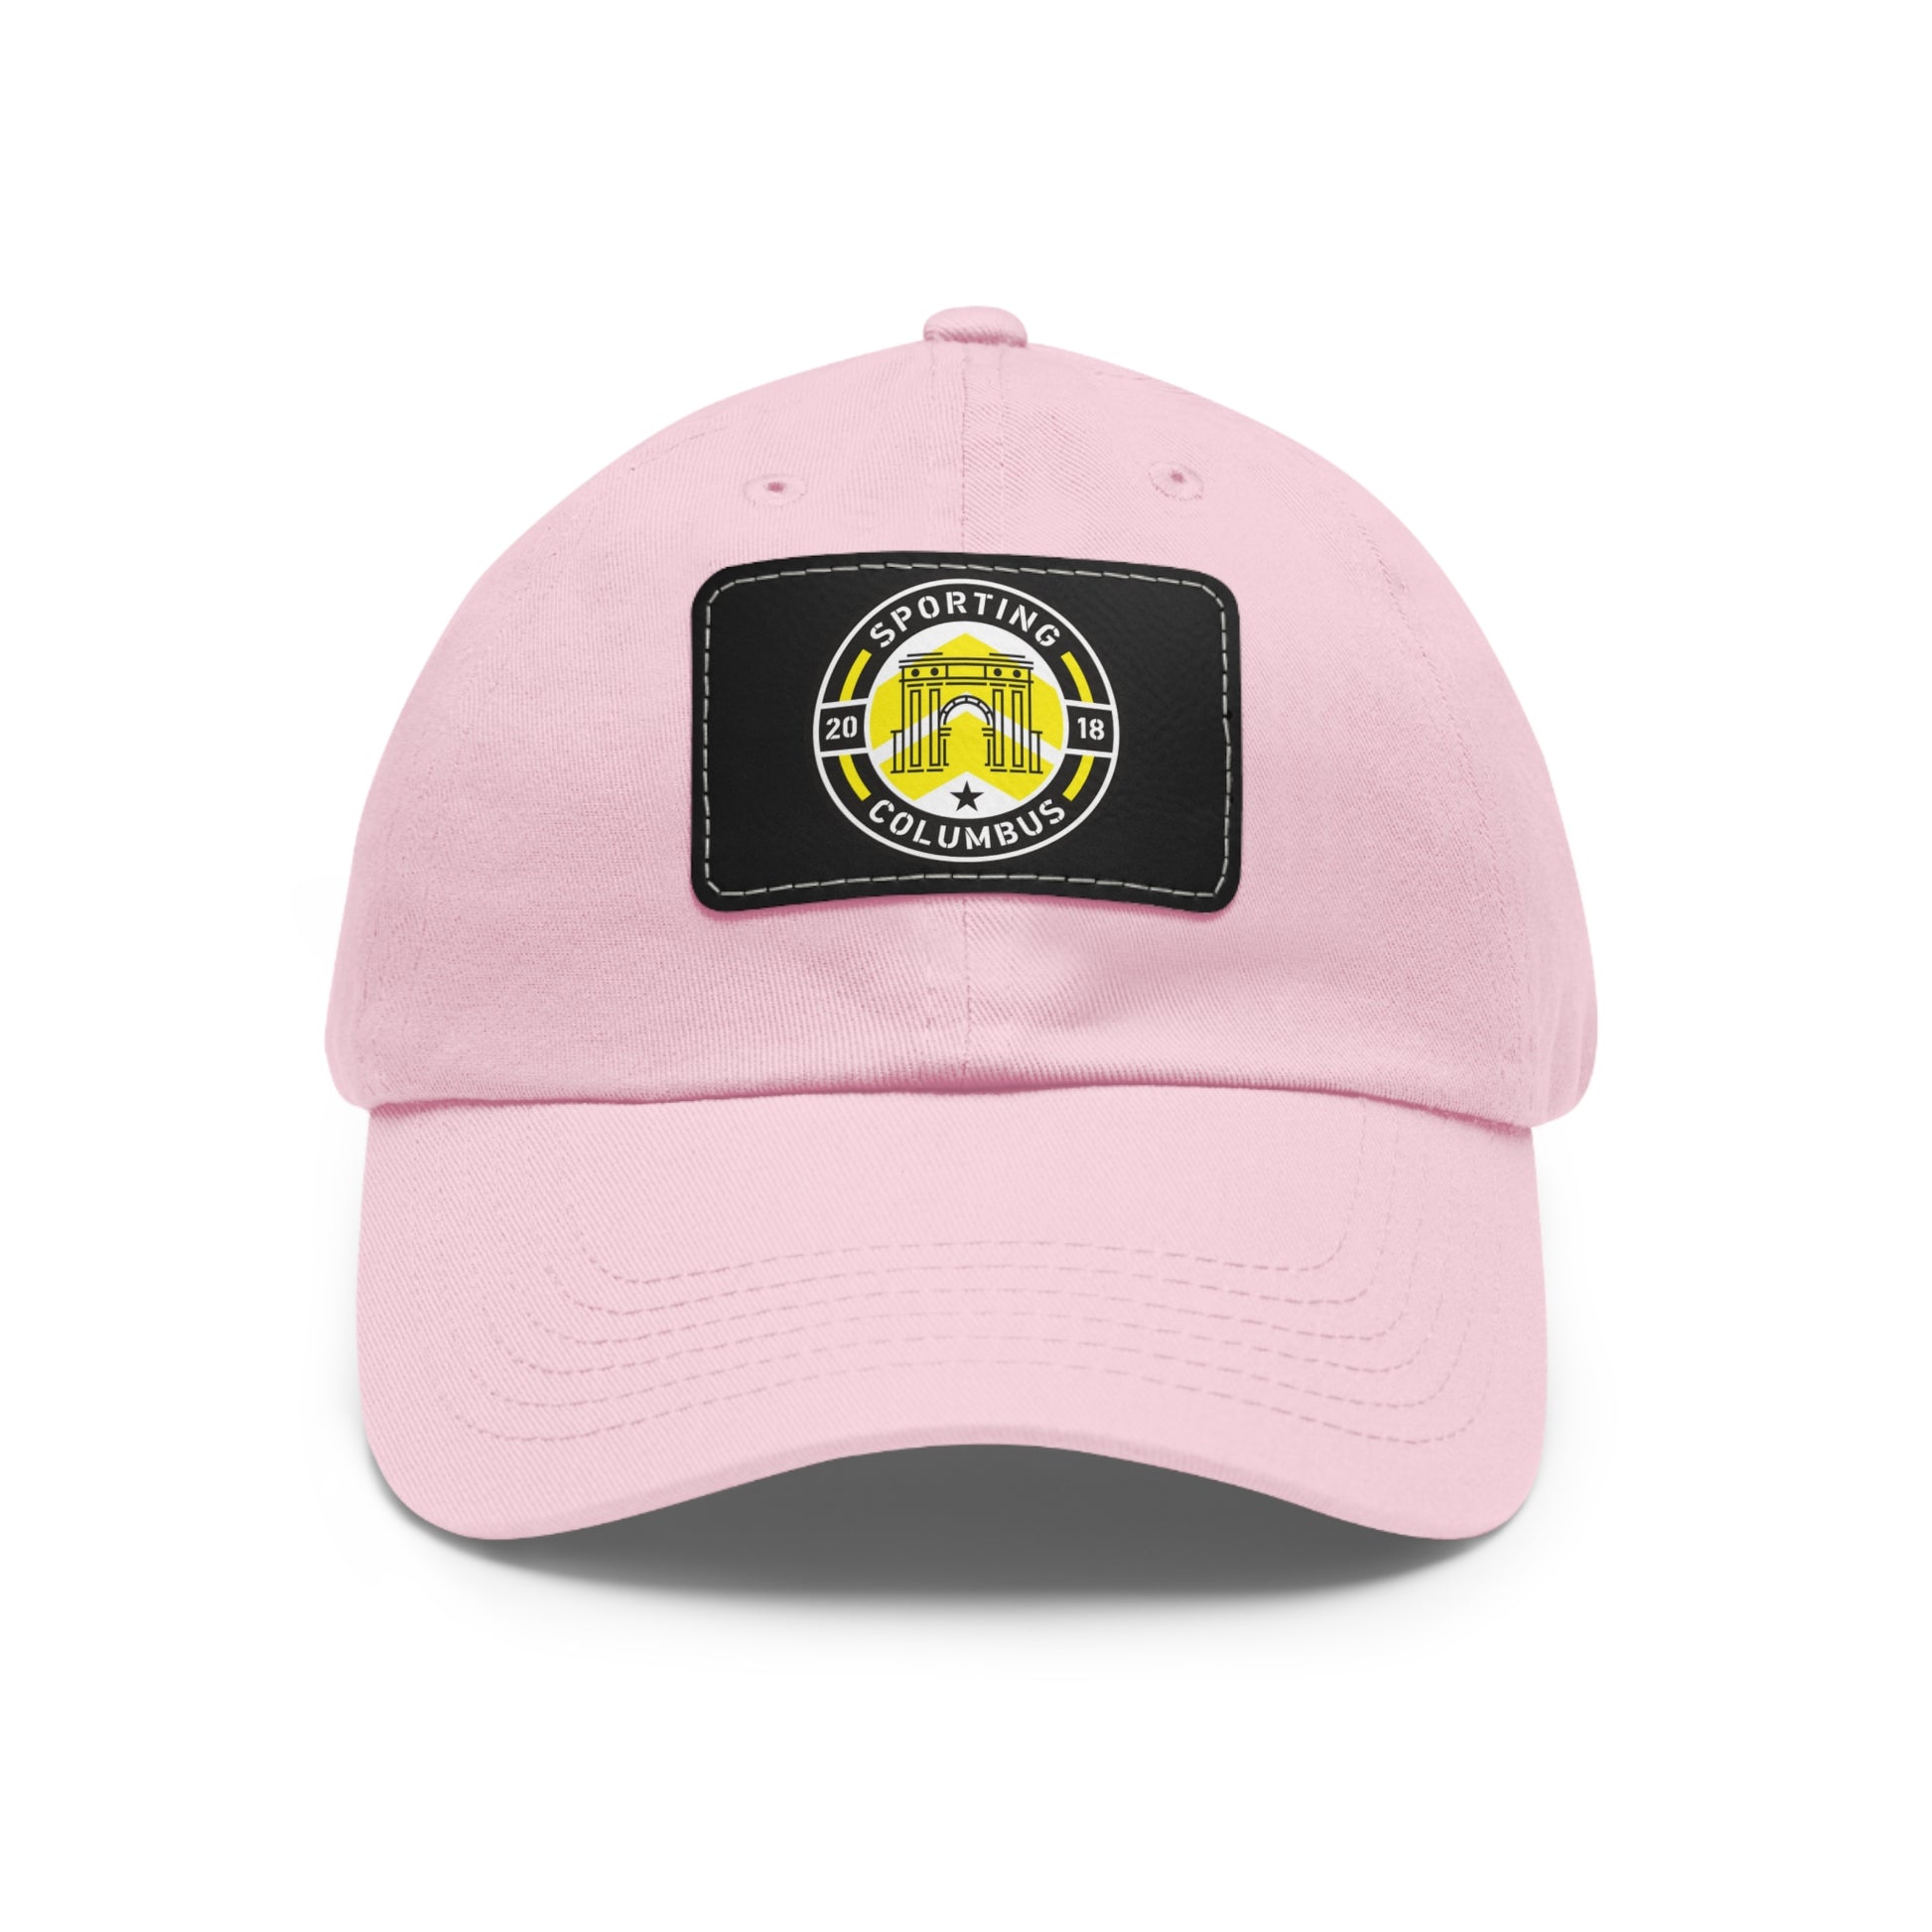 Sporting Columbus Hat with Leather Patch (Rectangle)